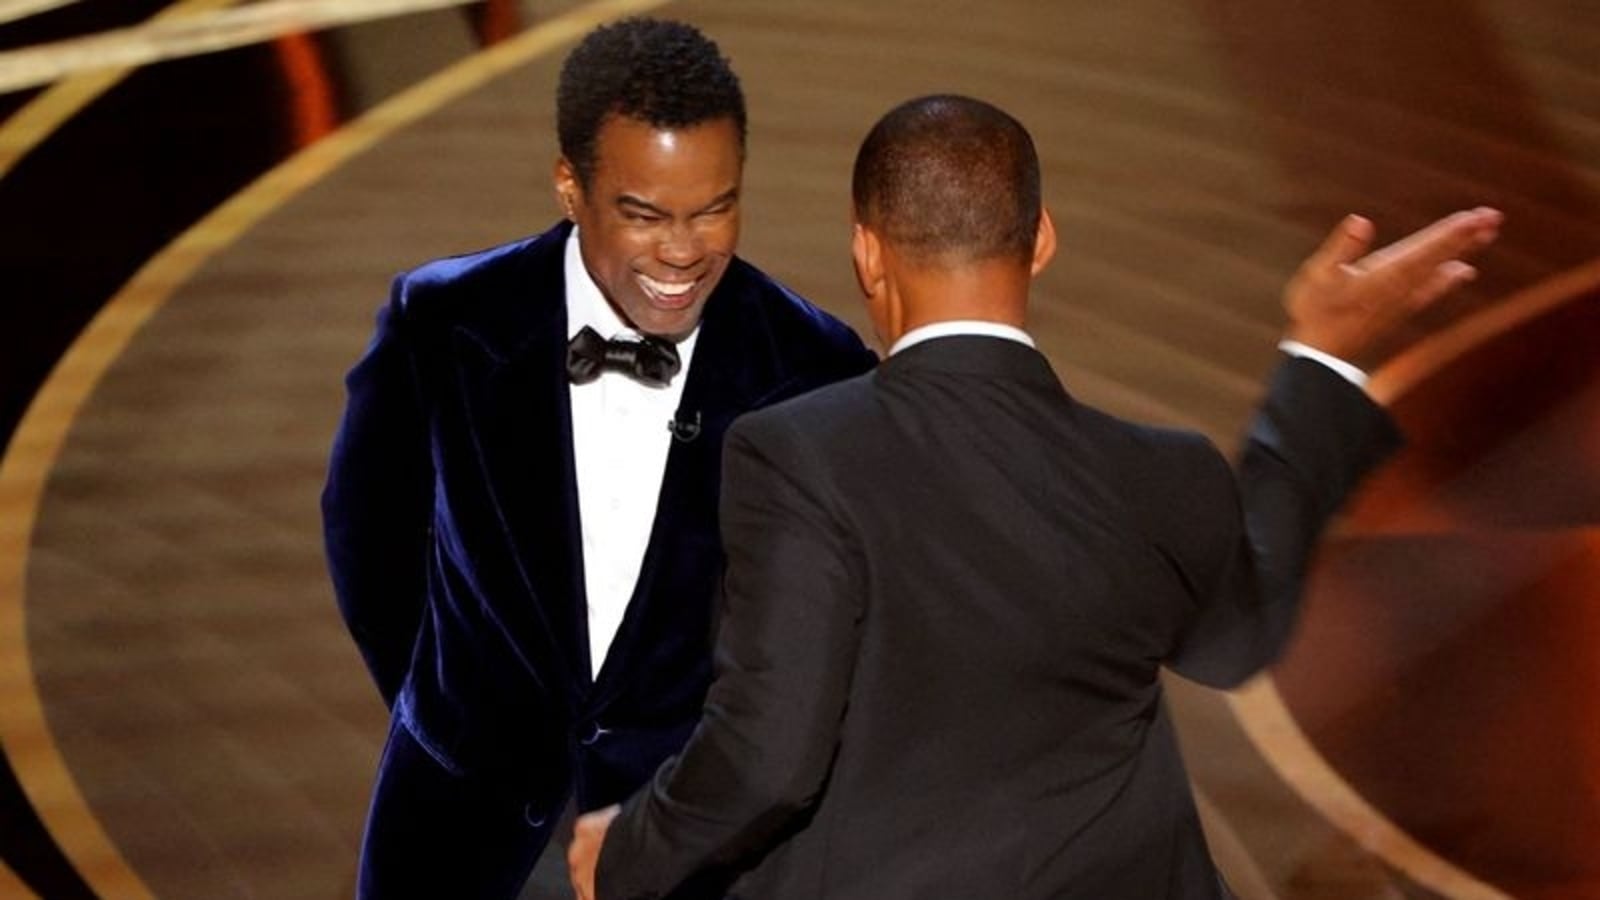 Chris Rock won't file police complaint against Will Smith after ...